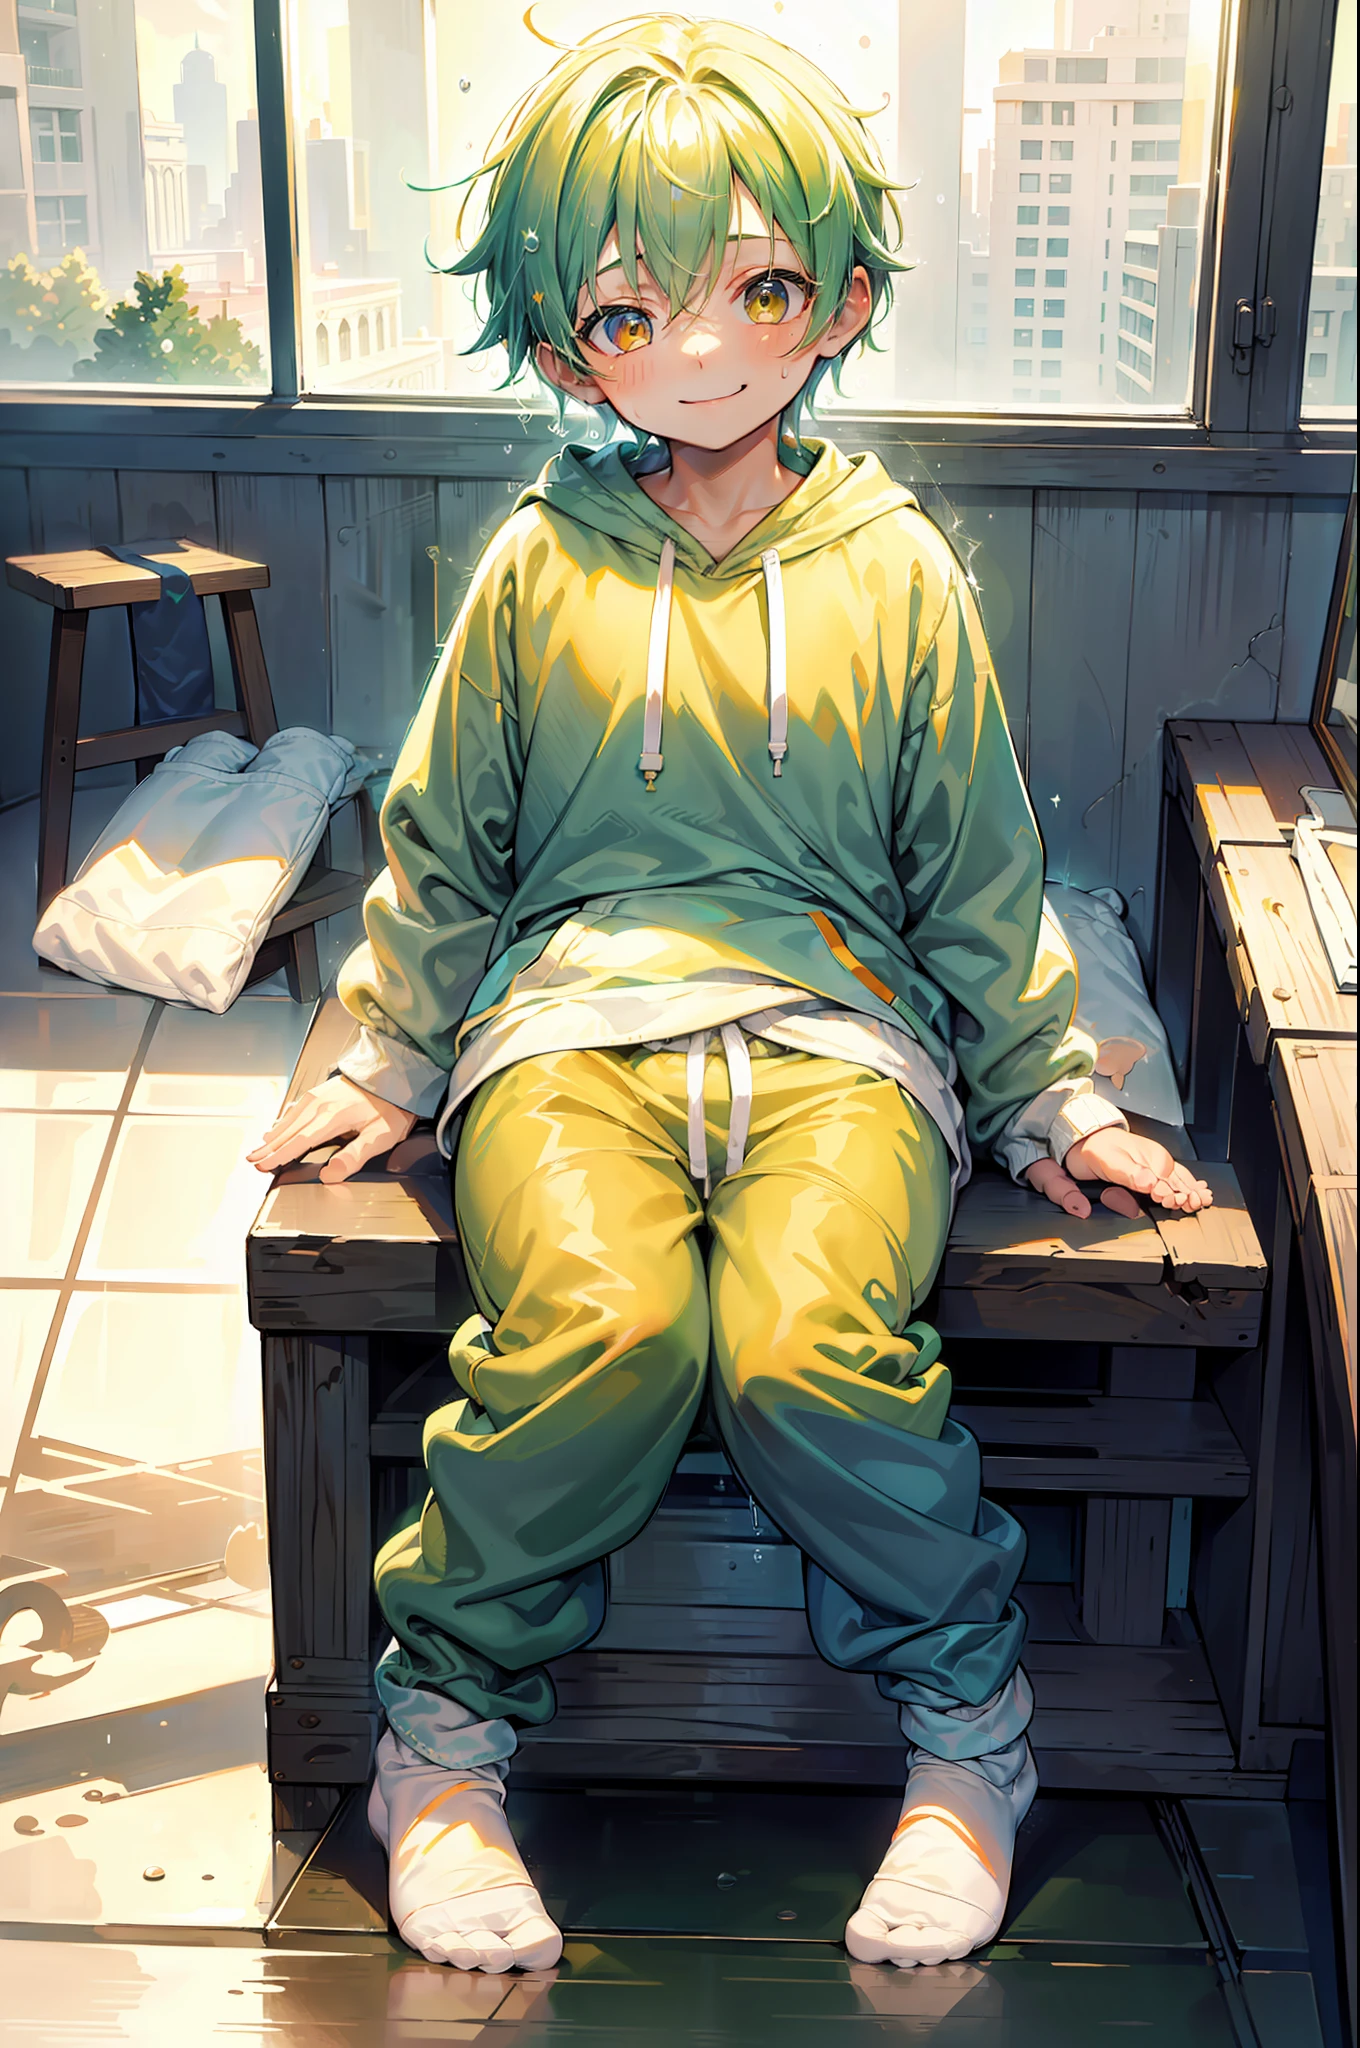 Masterpiece, chubby Little boy with green hair and shiny bright orange colored eyes and small socks wearing a hoodie, and oversized sweatpants sitting in a his room, raining outside window, young, boy, , small, toddler, soft light, (sweatpants:1.4), (undersized socks:1.4), (Boy:1.4), (Shota:1.4), (Young:1.4), (Male:1.4), (smiling:1.4), (foot:1.4), (shy:1.4), (pastel:1.0), (colors:1.0), (cute colors:1.0), (divine:1.0),